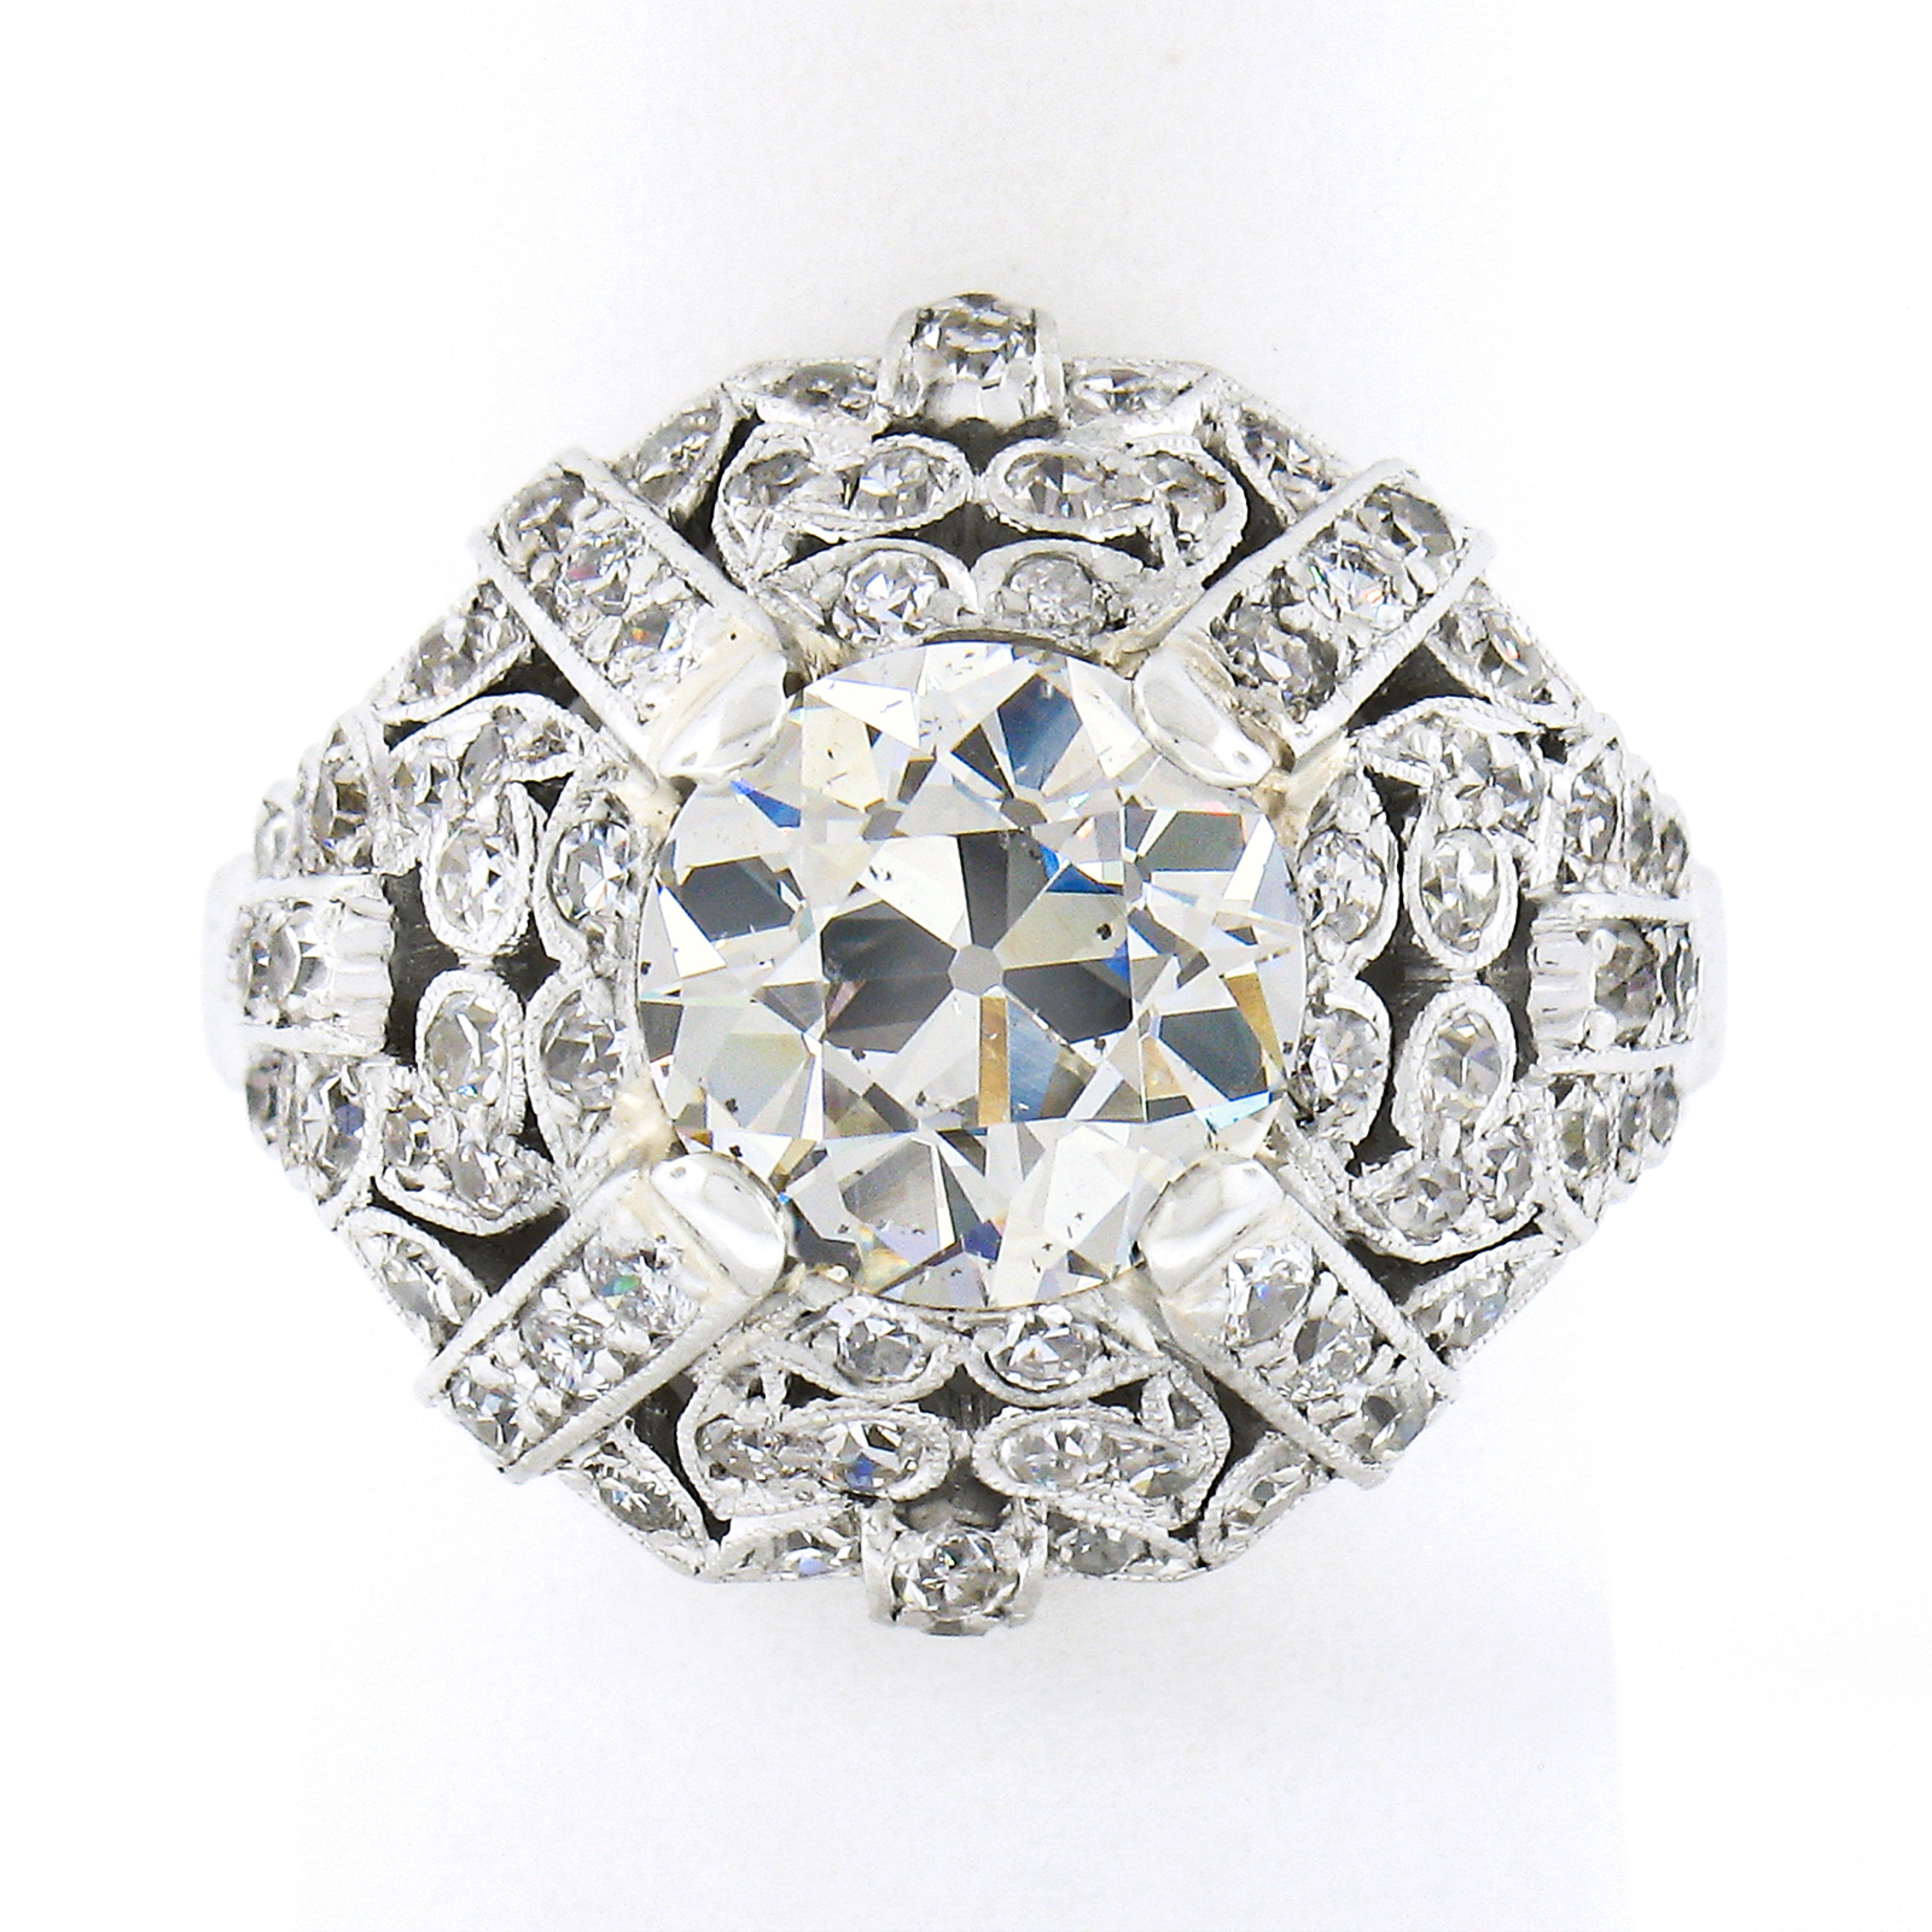 This is an absolutely breathtaking antique engagement or dinner ring that was very well crafted in solid platinum during the Edwardian era. This unique and highly detailed ring features a GIA certified, old European cut, diamond solitaire neatly